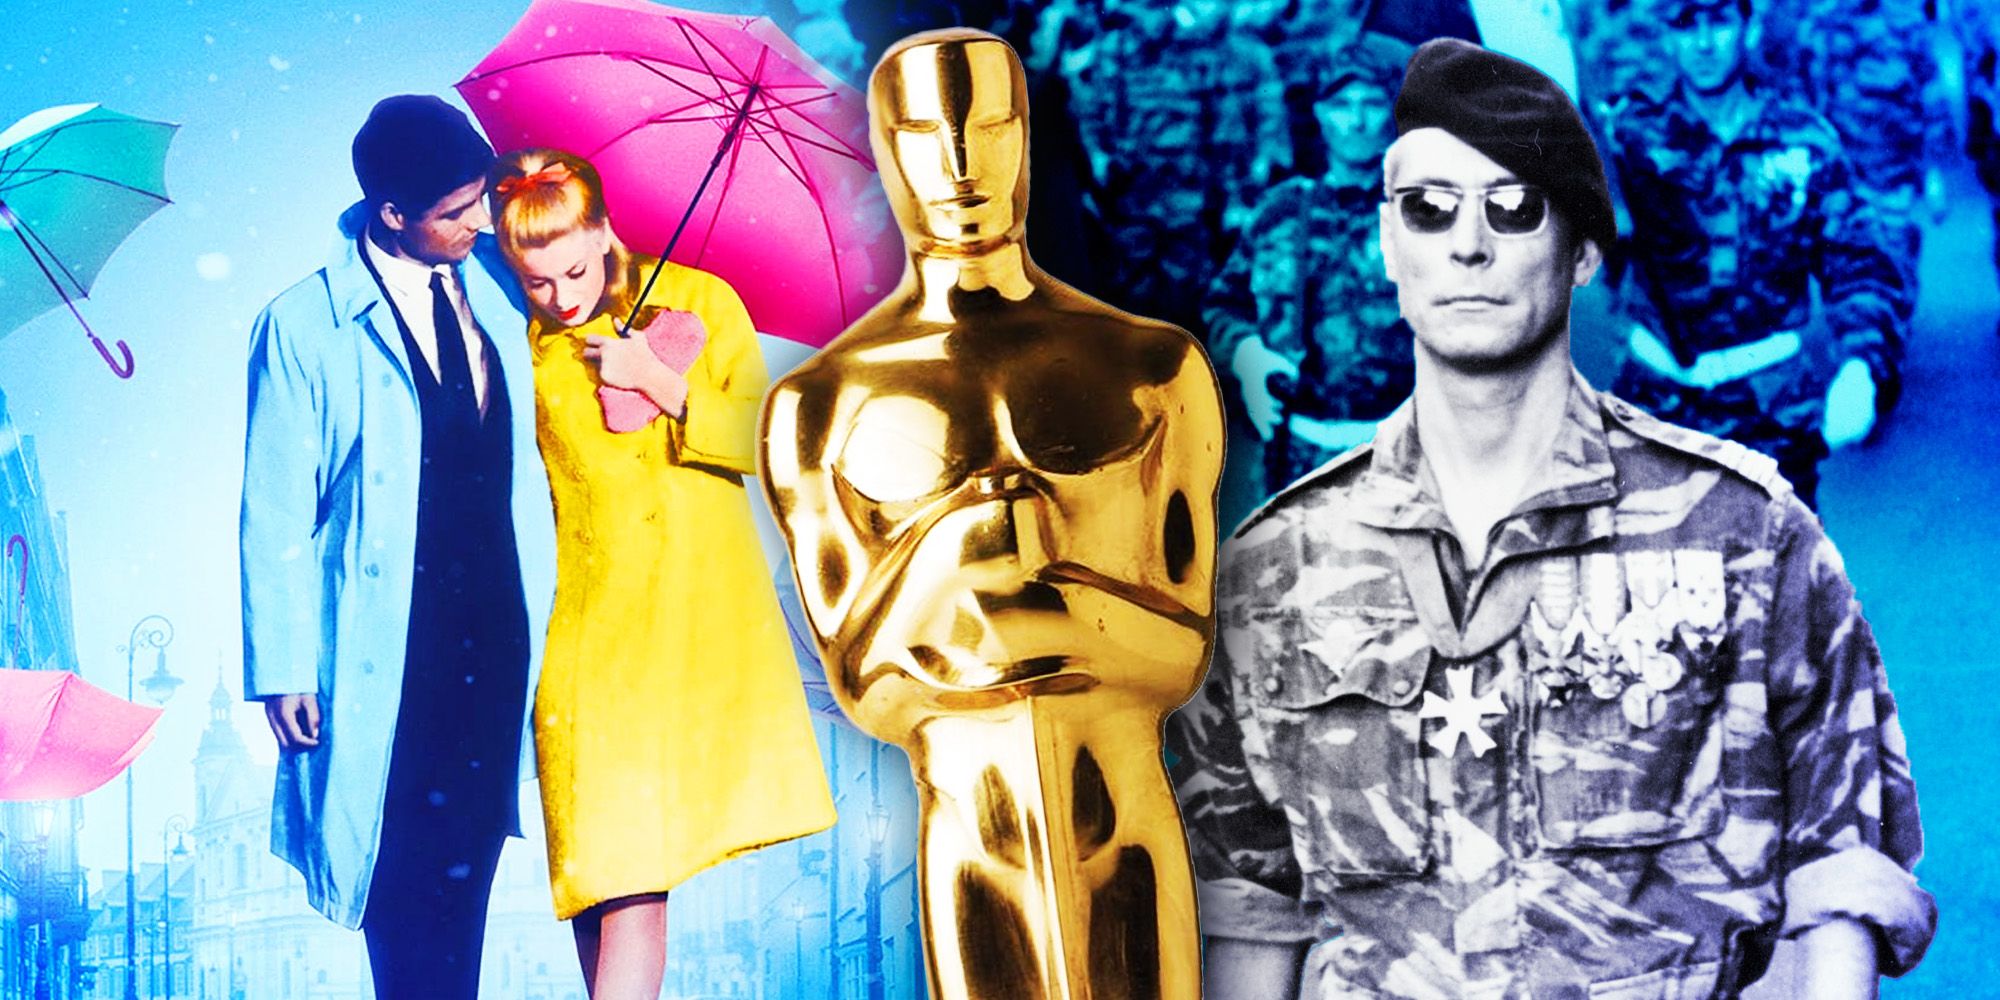 Oscars collage with The Umbrellas of Cherbourg and The Battle of Algiers with an Oscar statuette in front center.